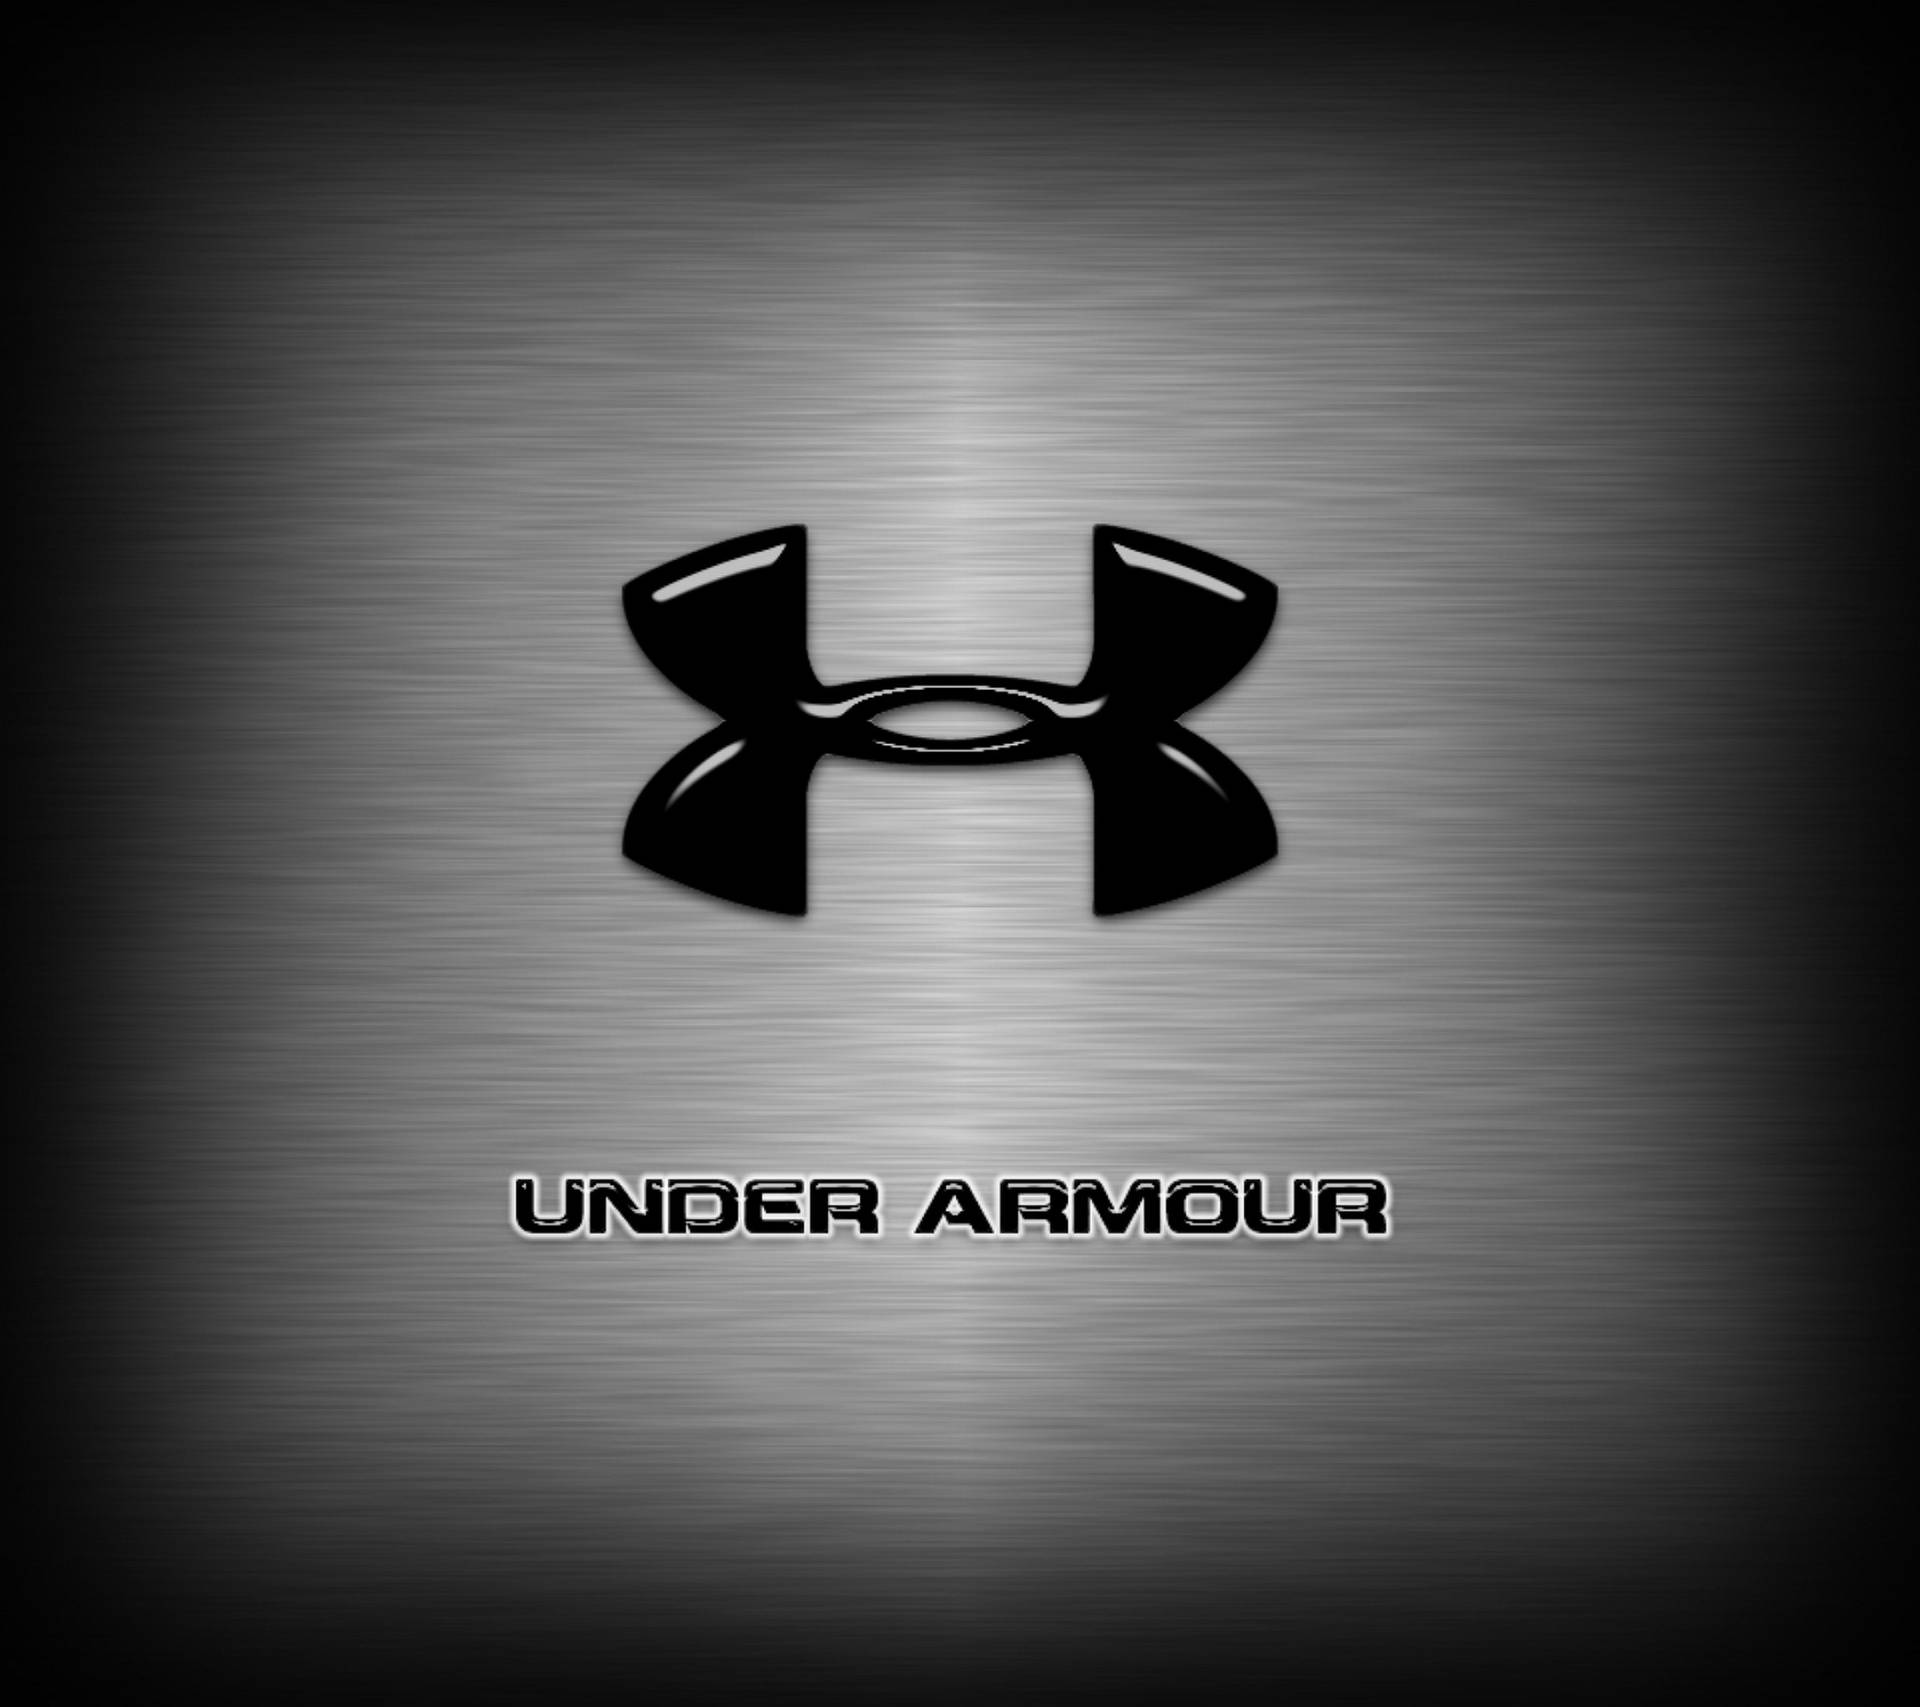 Top 999+ Under Armour Wallpaper Full HD, 4K Free to Use